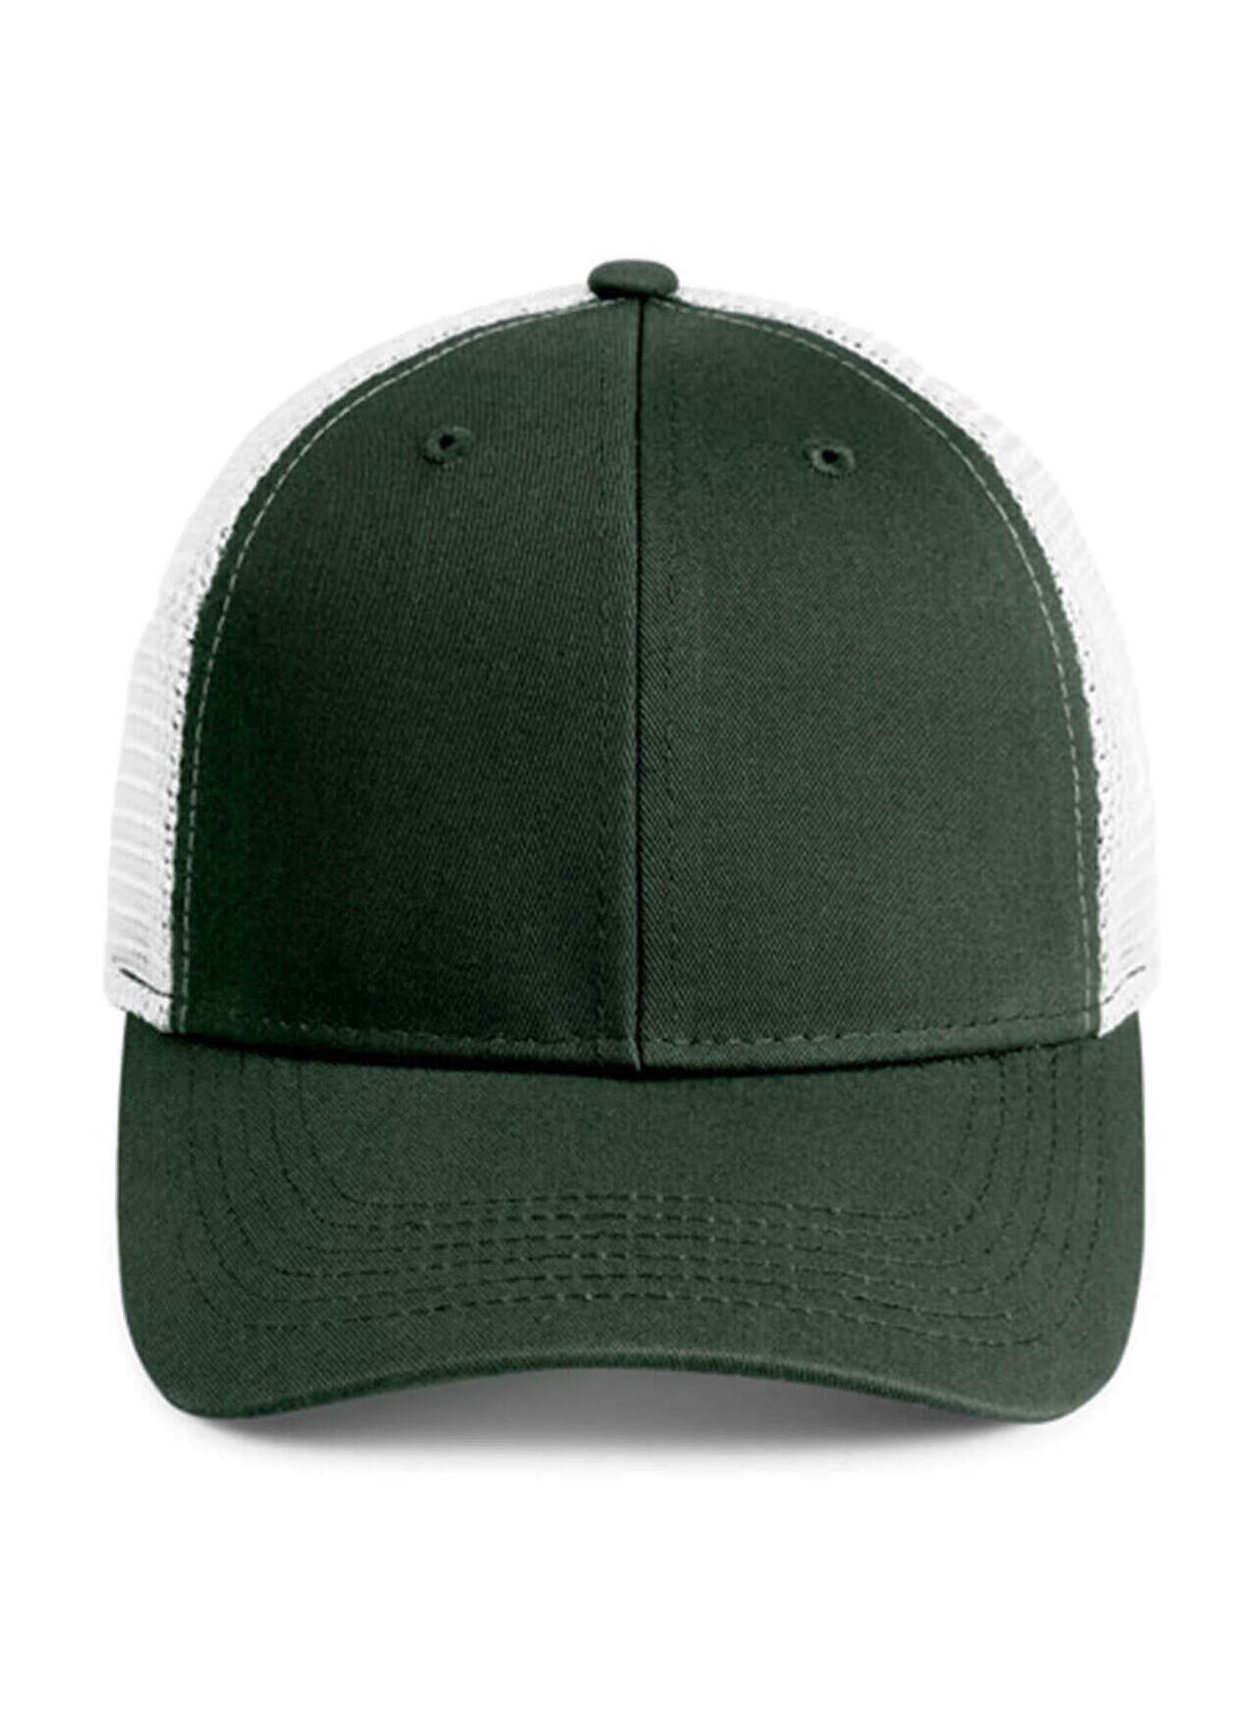 Imperial Dark Green / White The Catch & Release Hat Adjustable Meshback Hat